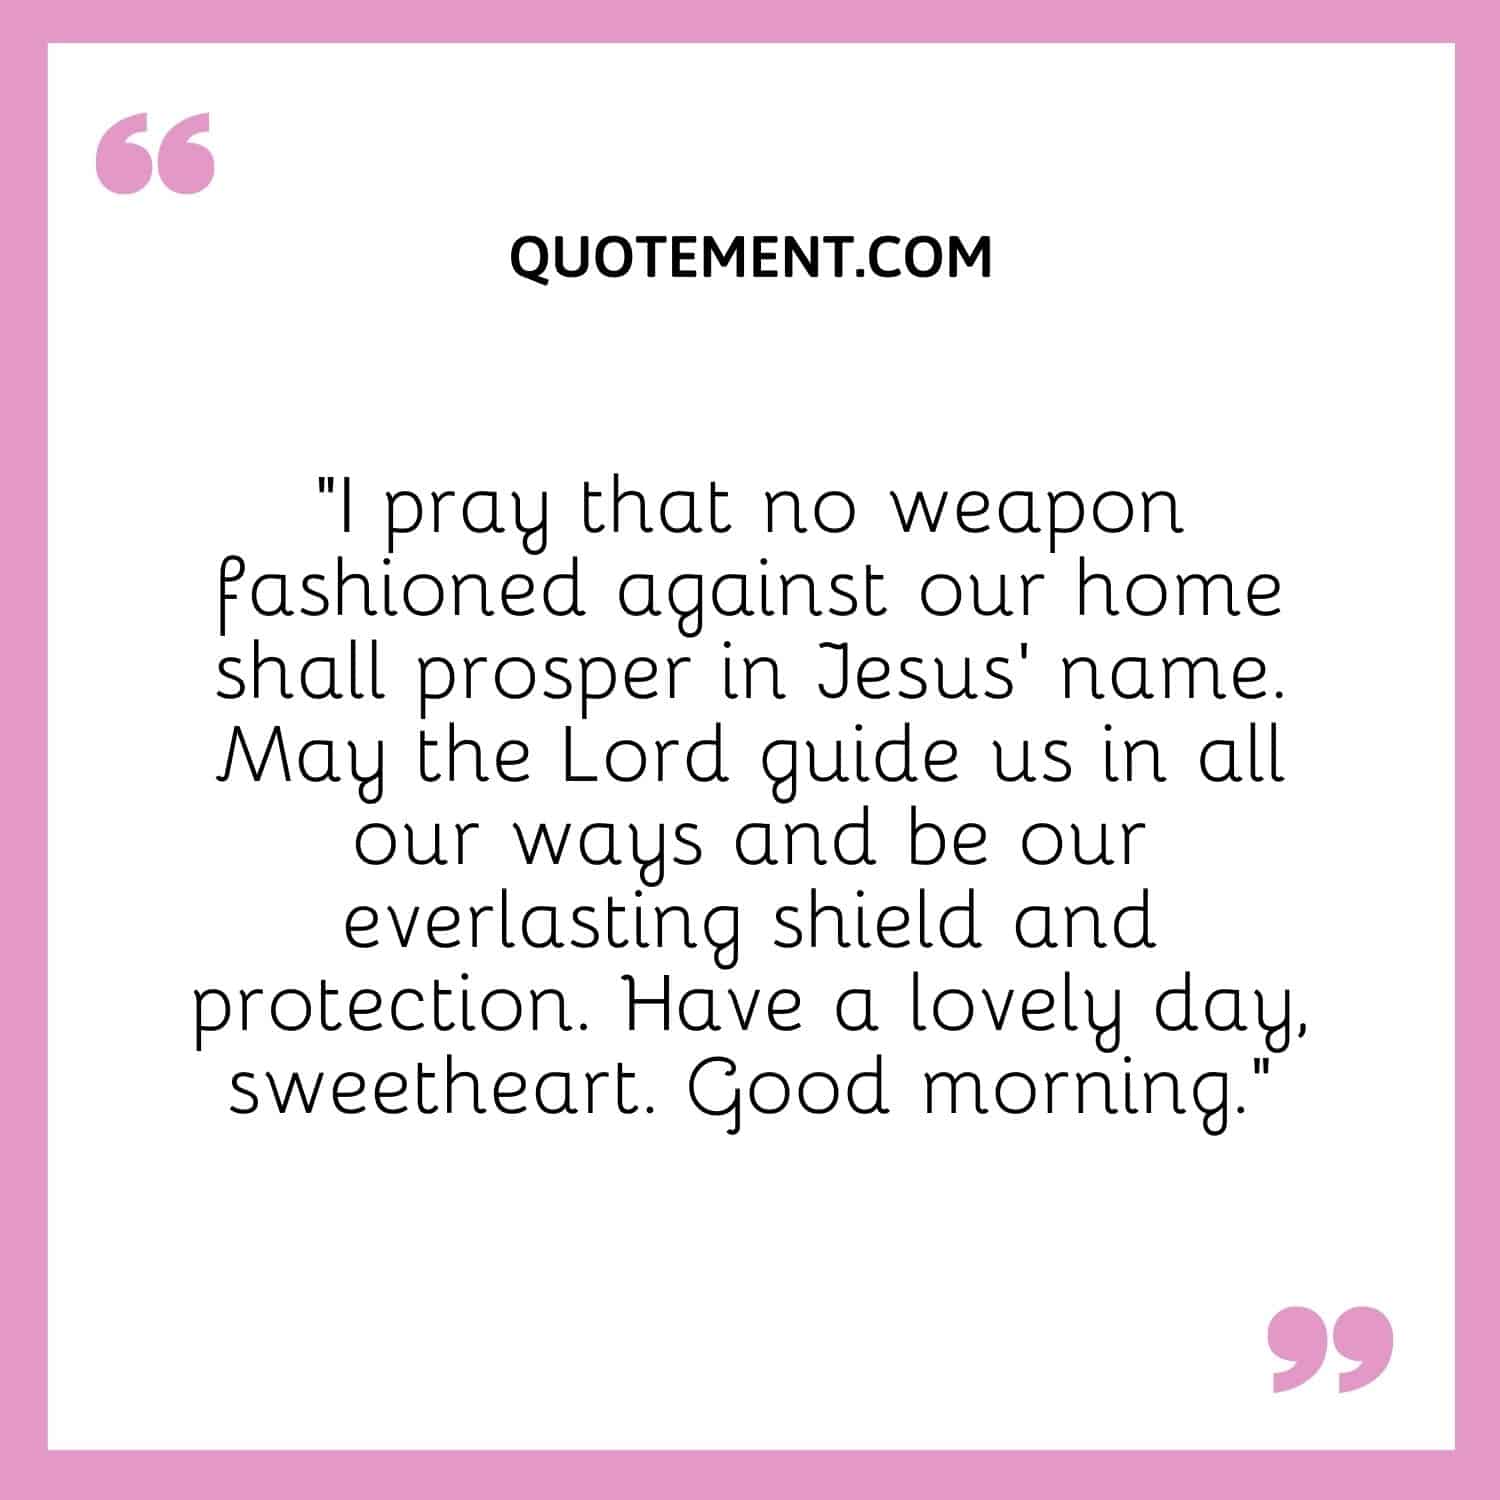 I pray that no weapon fashioned against our home shall prosper in Jesus’ name